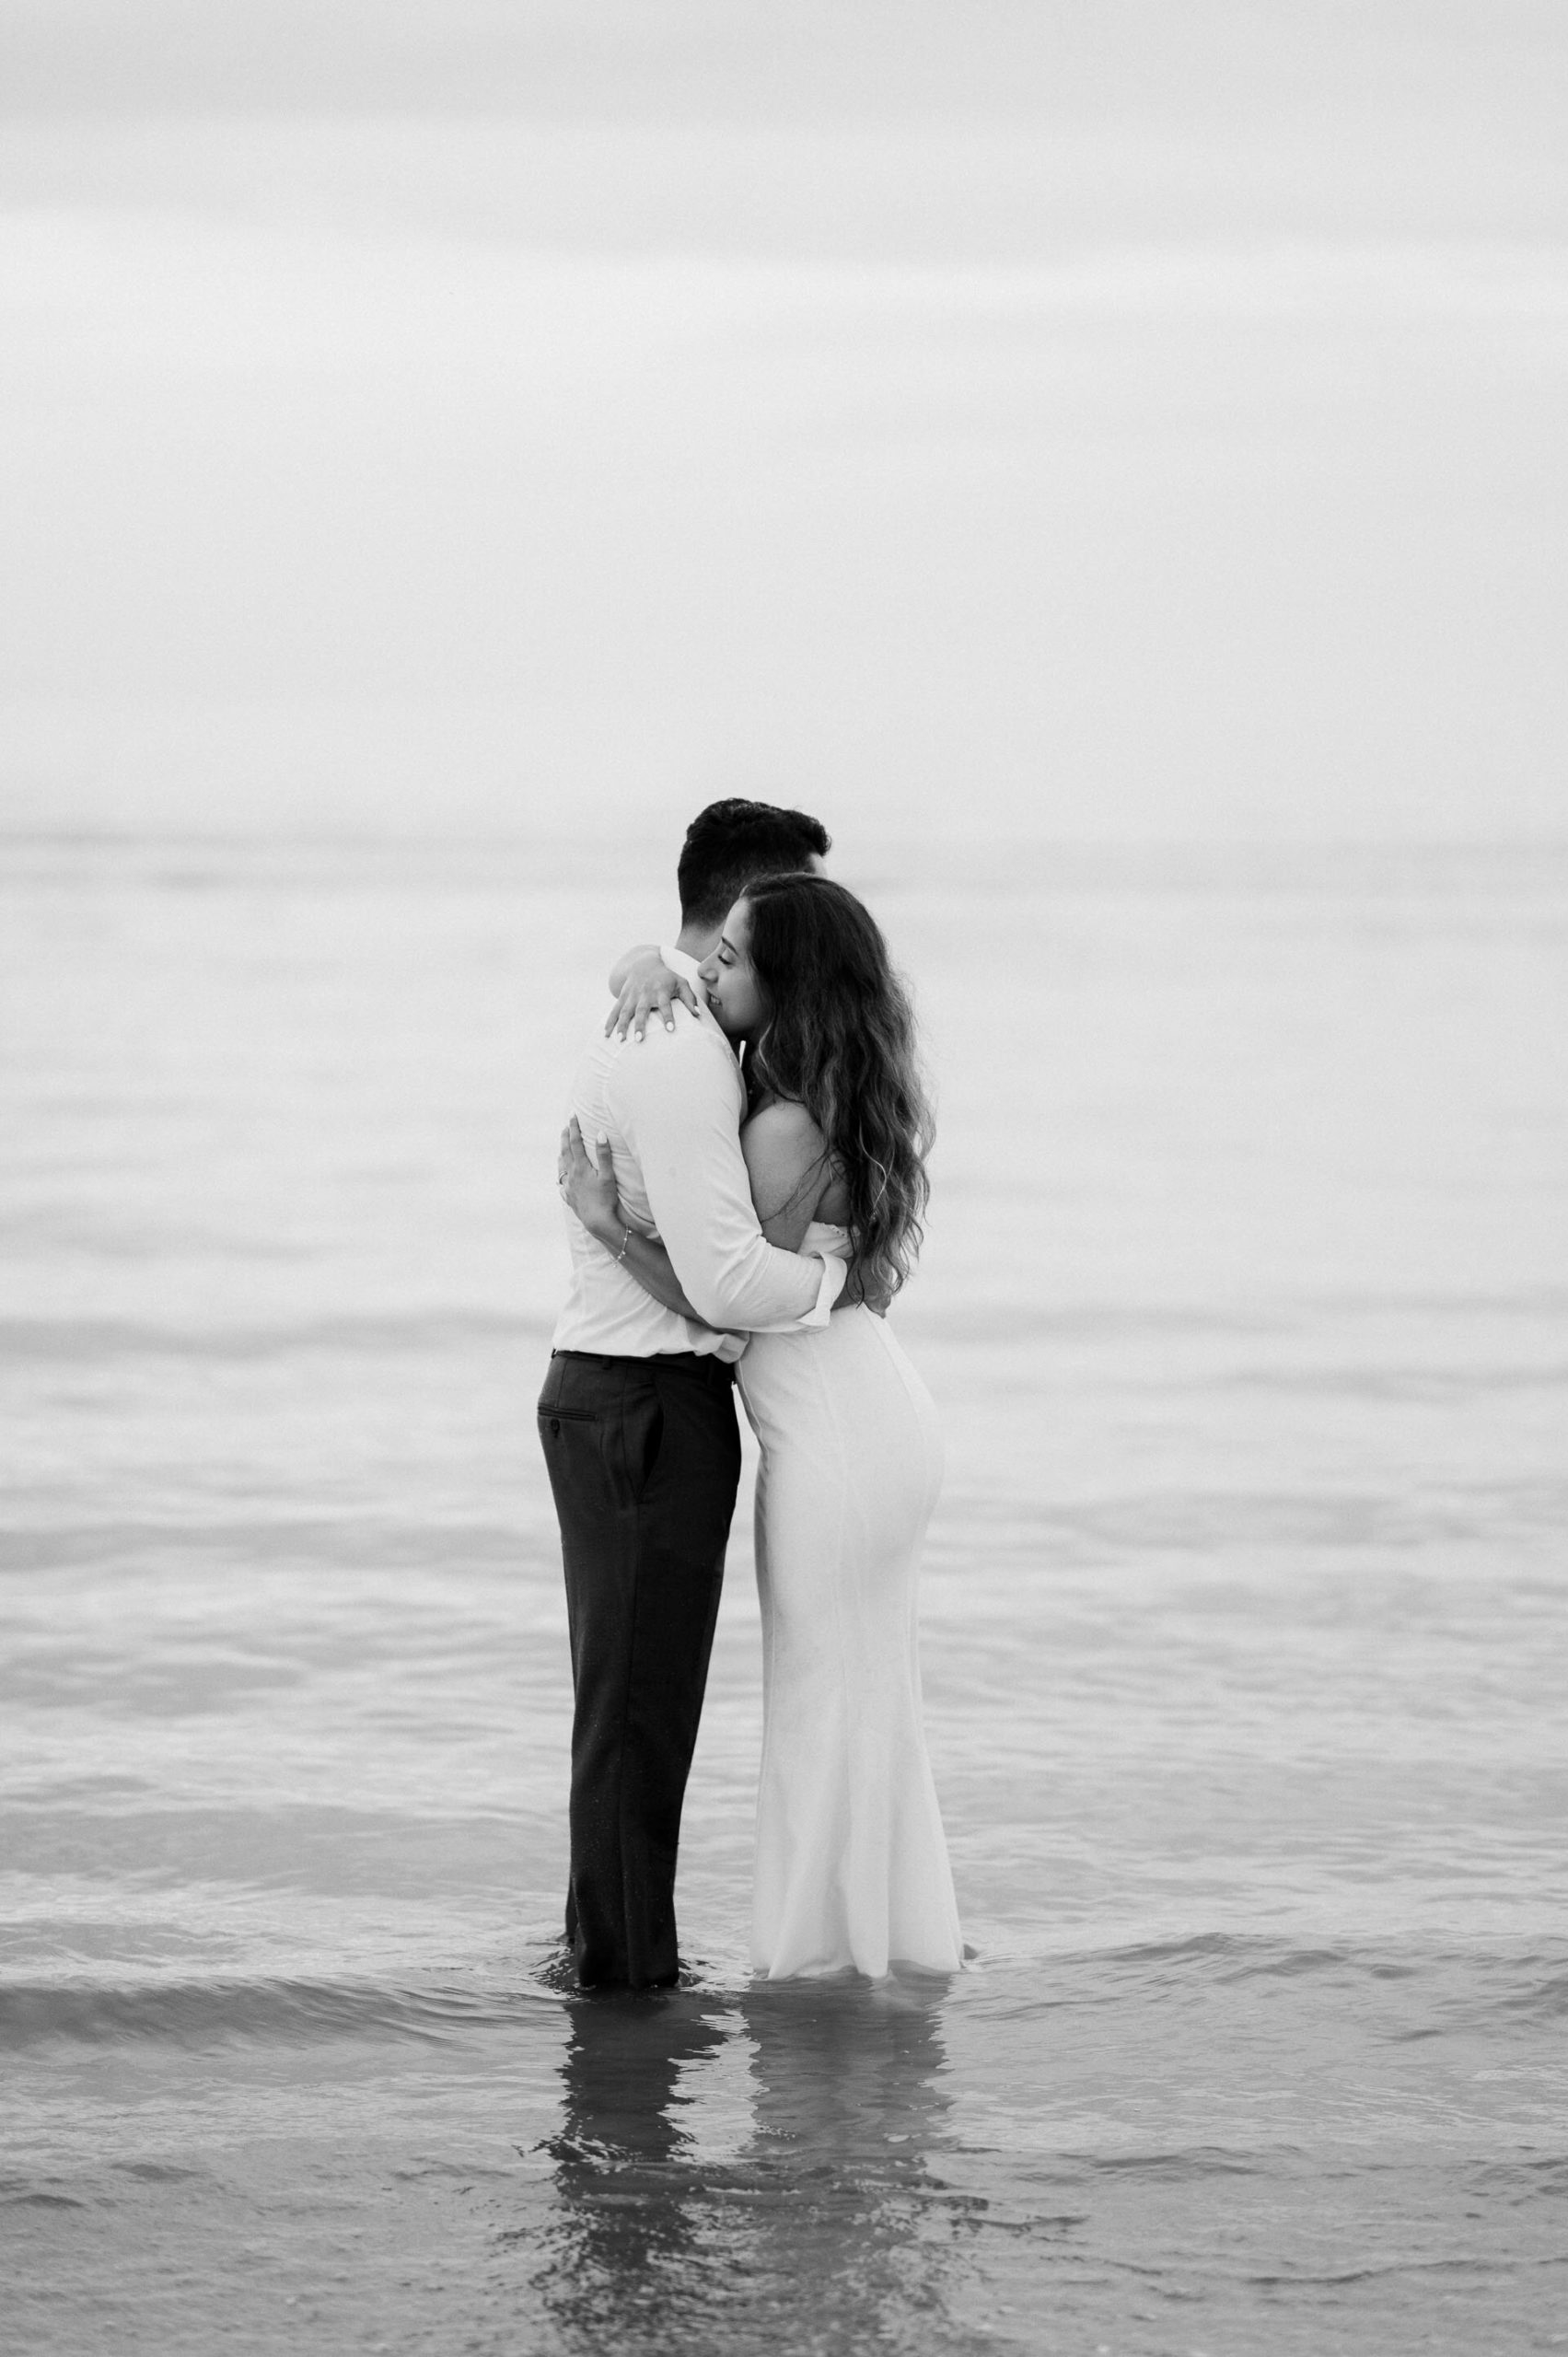 Demiana and Goergeuos - Camber Sands Golden Hour Beach Shoot - Laura Williams Photography-53.jpg